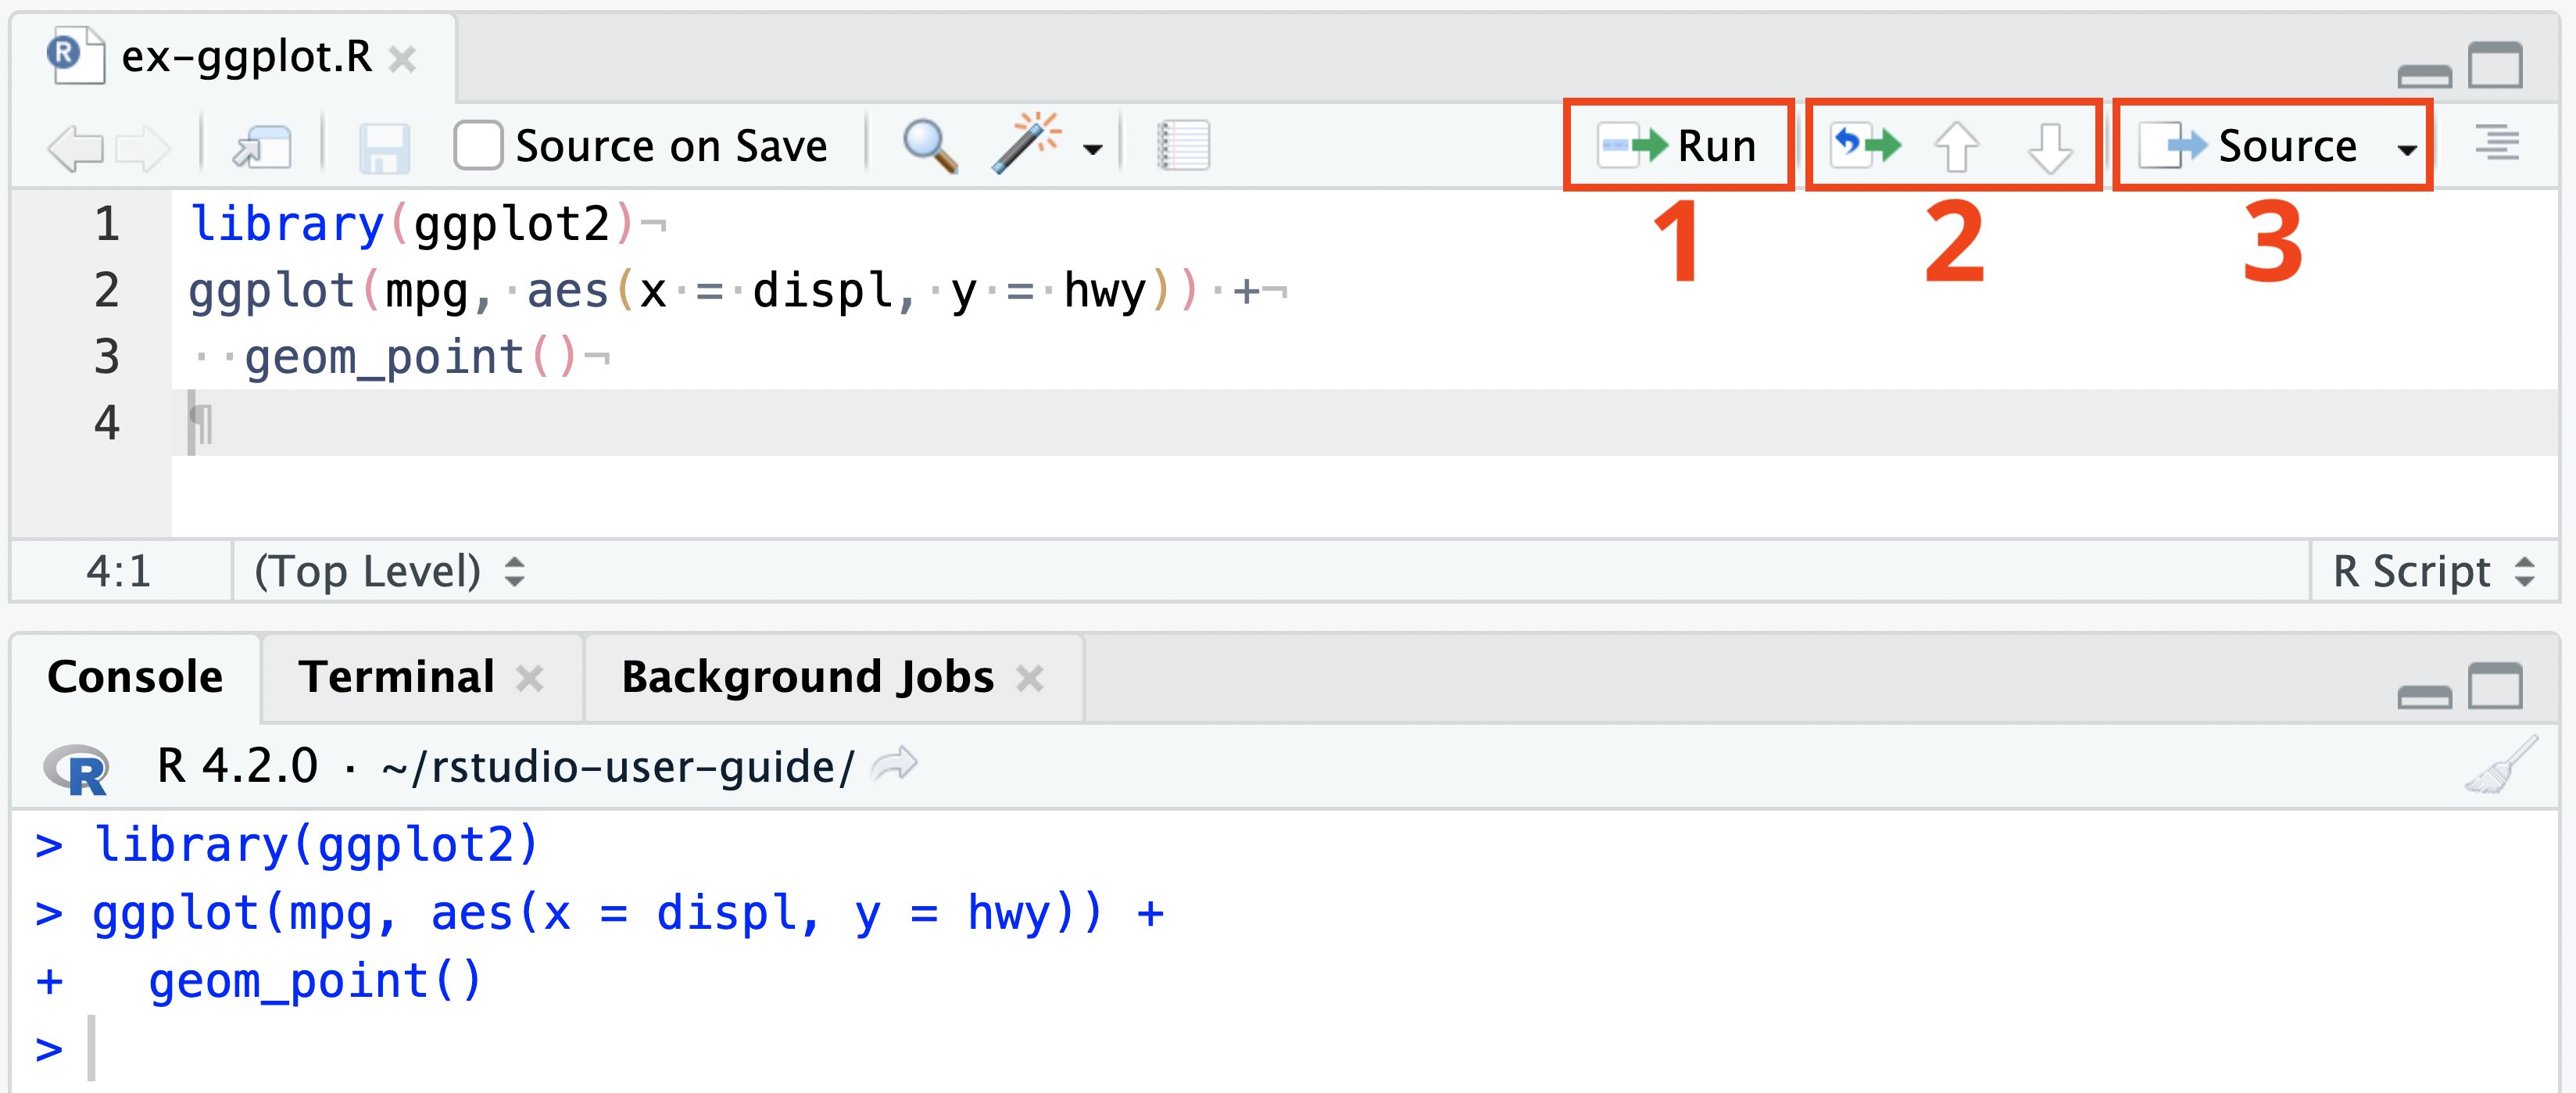 Highlighting the Run, Run previous, and Source menu options in the Source pane.